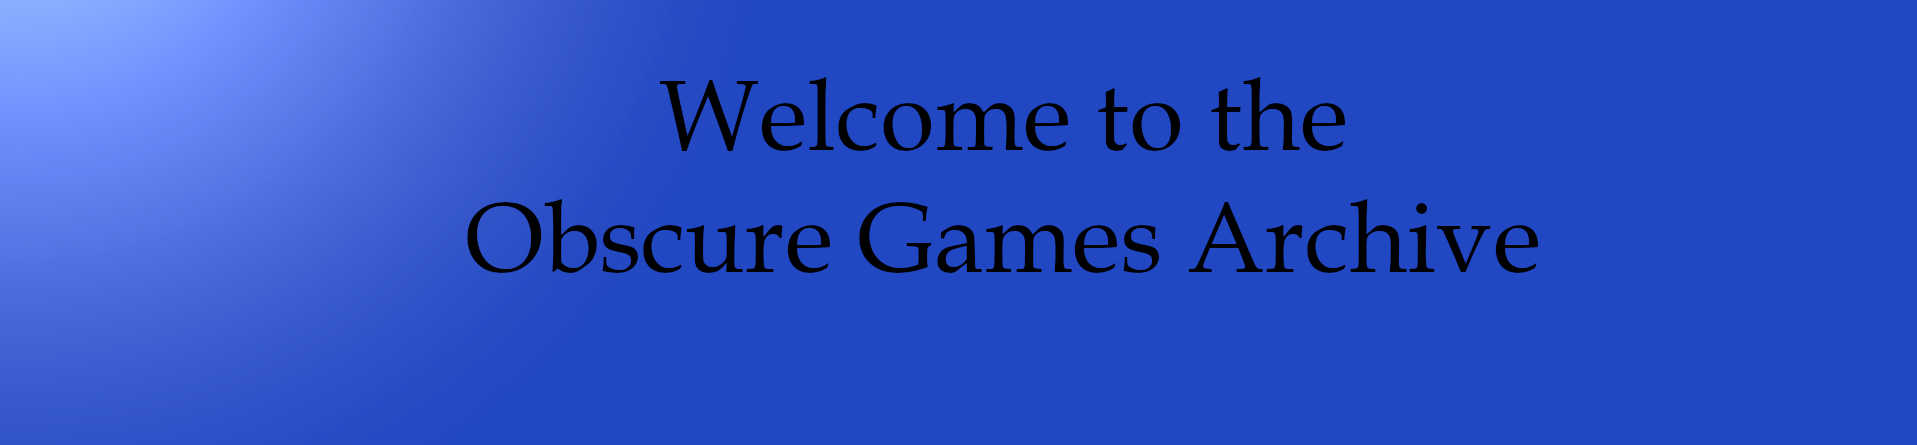 Welcome to the Obscure Games Archive